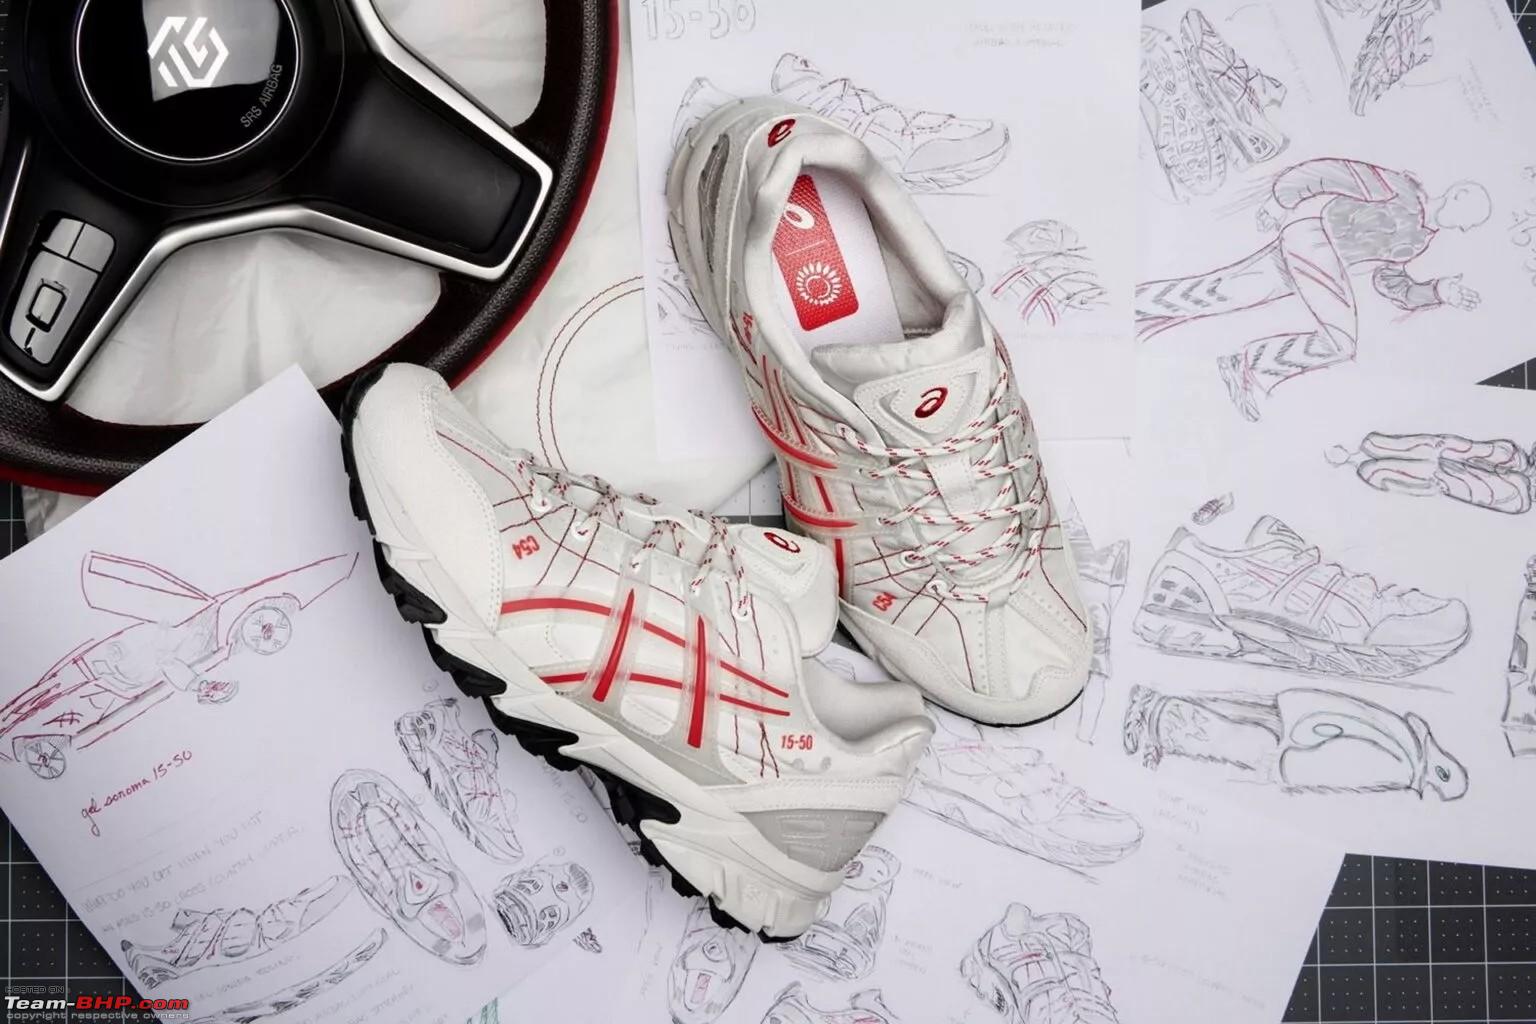 Used airbag fabric recycled & used in manufacturing sports shoes by Asics -  Team-BHP